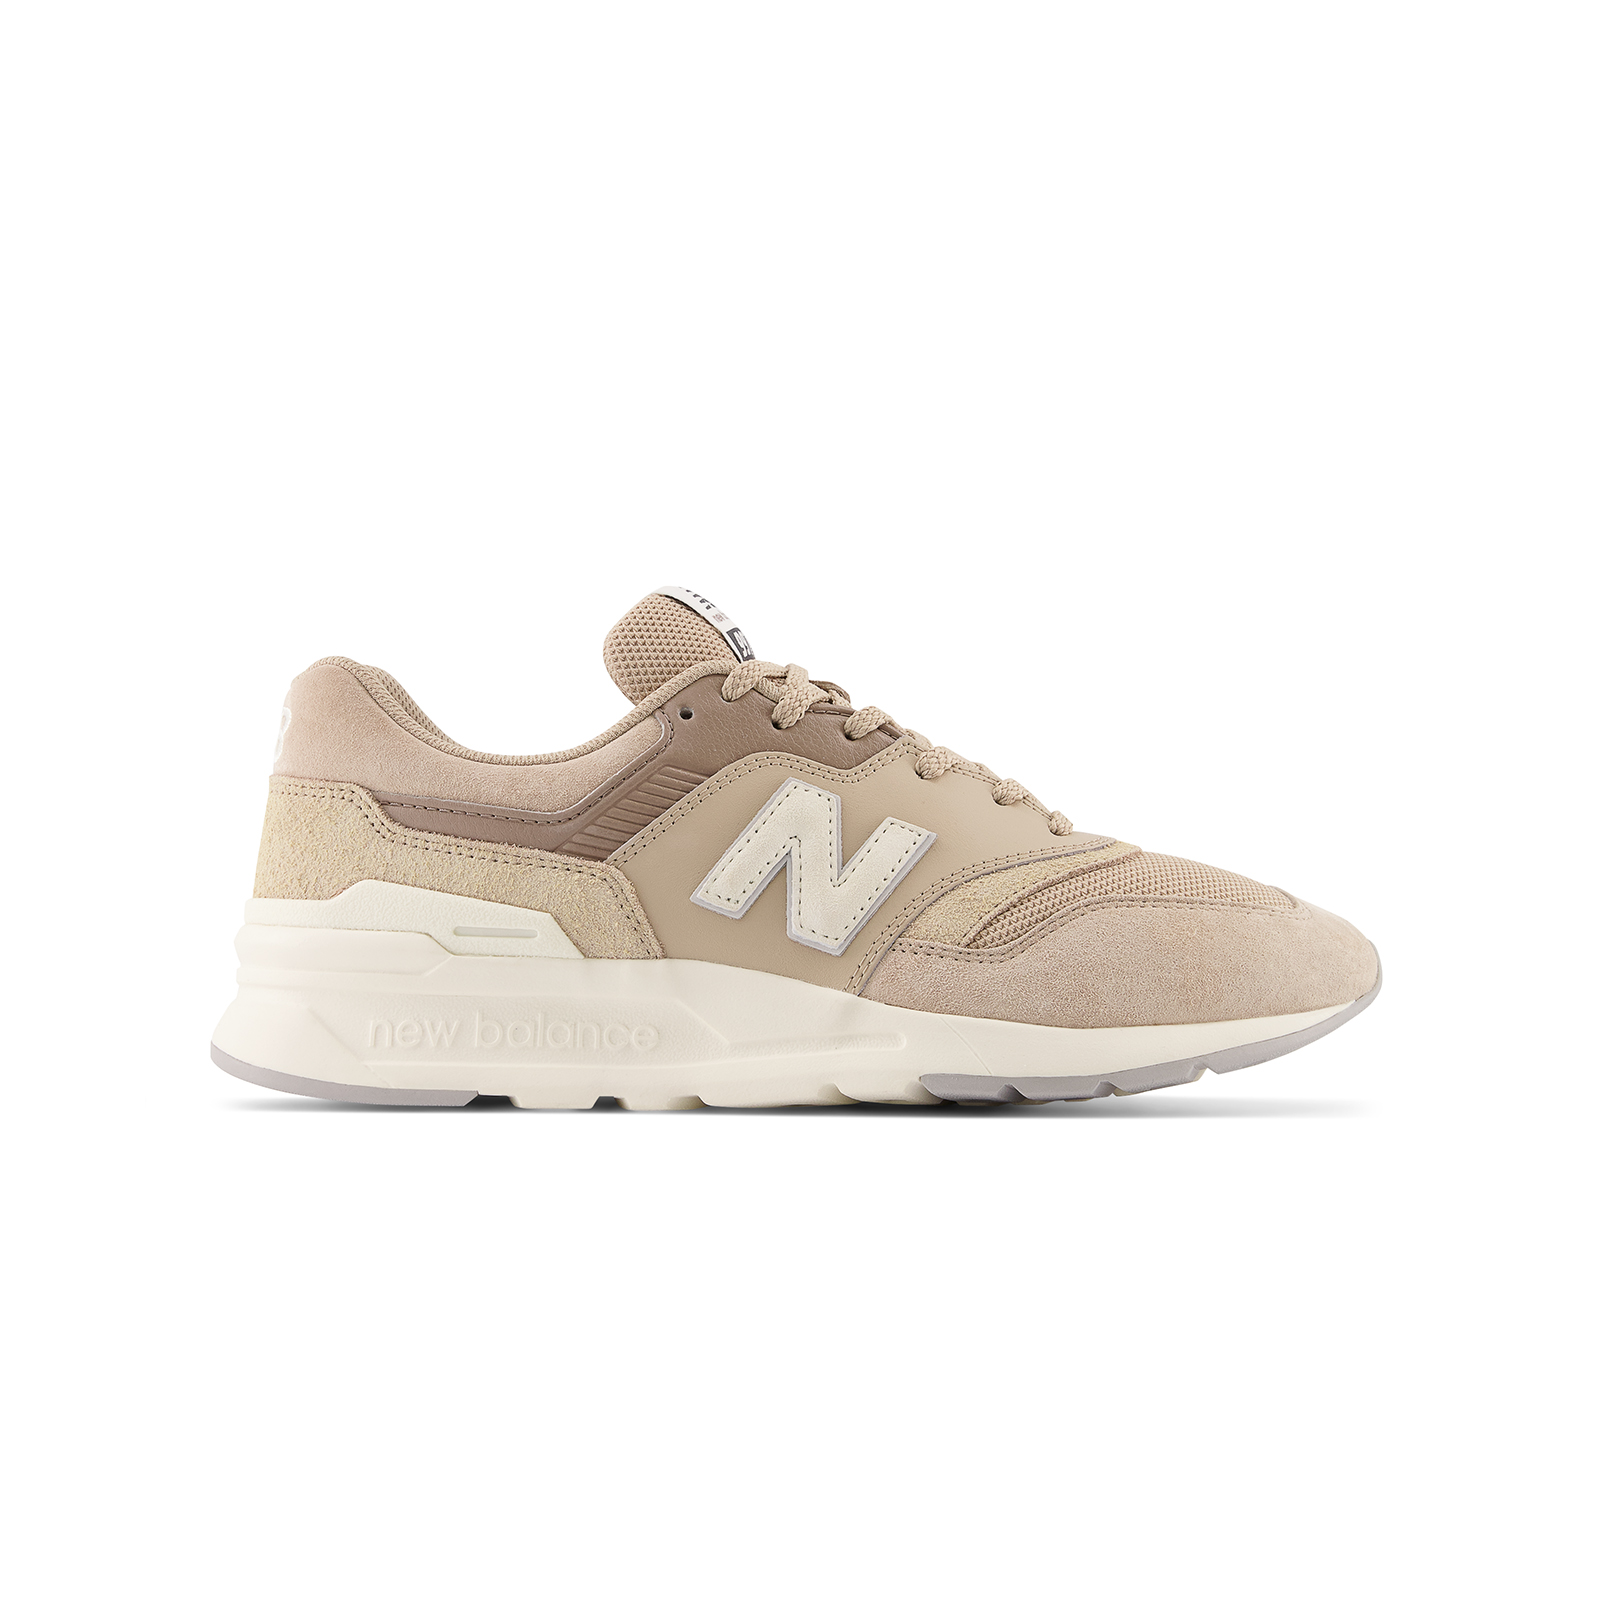 New balance ls - SHOES CLASSIC RUNNING - MINDFUL GREY Ανδρικά > Παπούτσια > Sneaker > Παπούτσι Low Cut